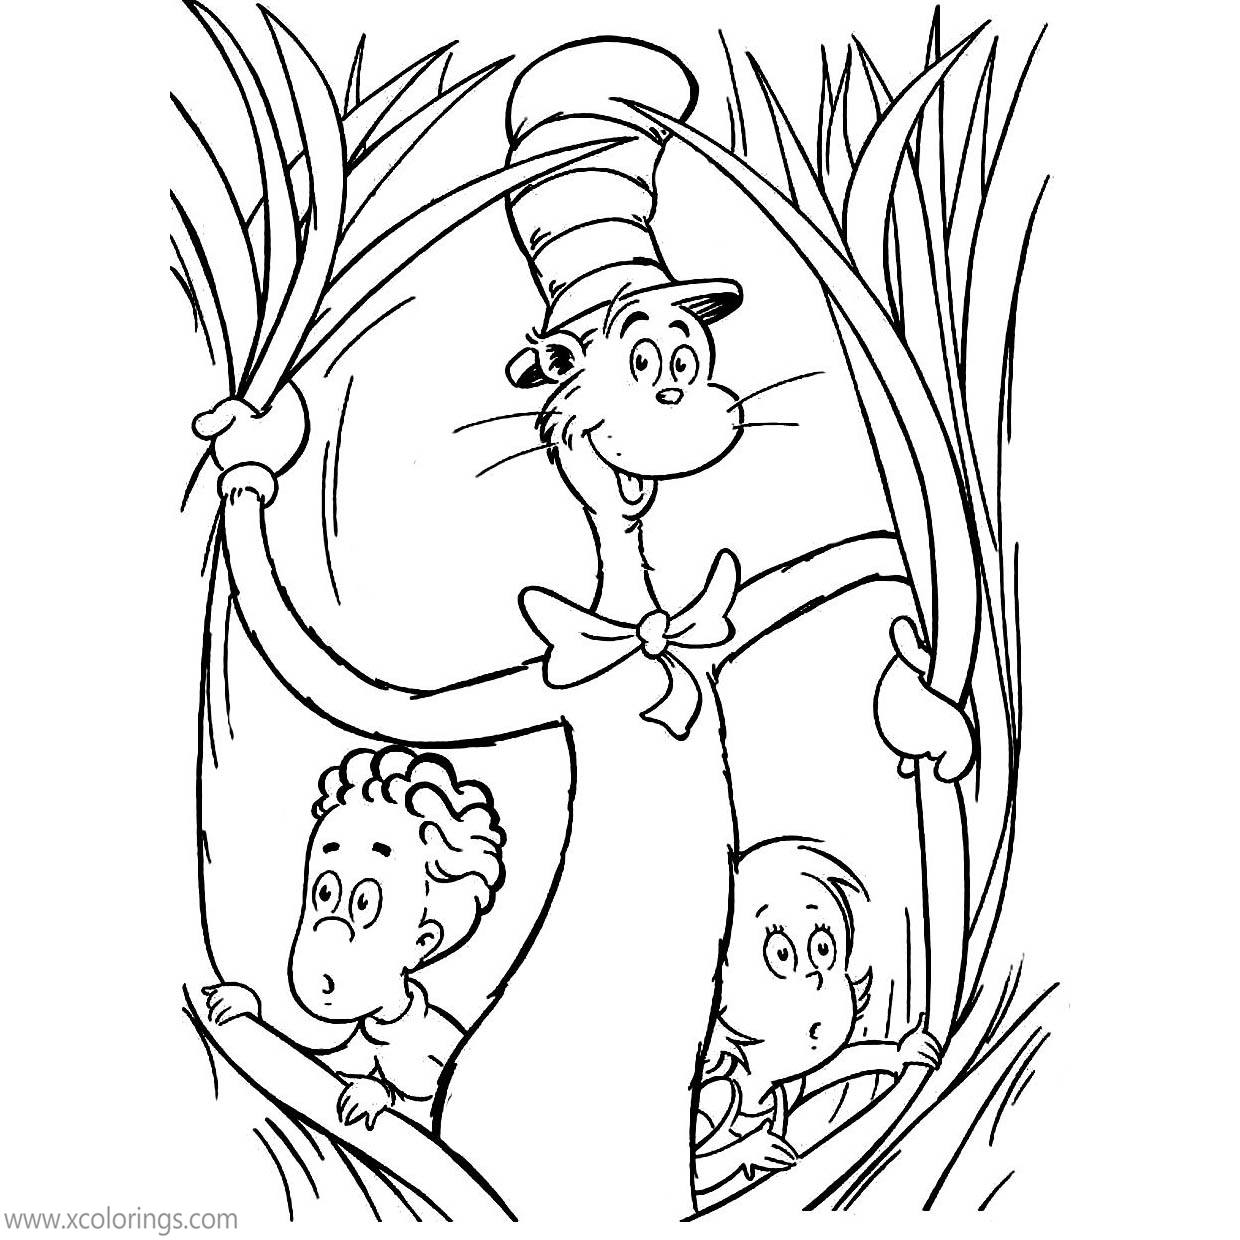 Free Cat In The Hat Coloring Pages Exploring in the Grass printable